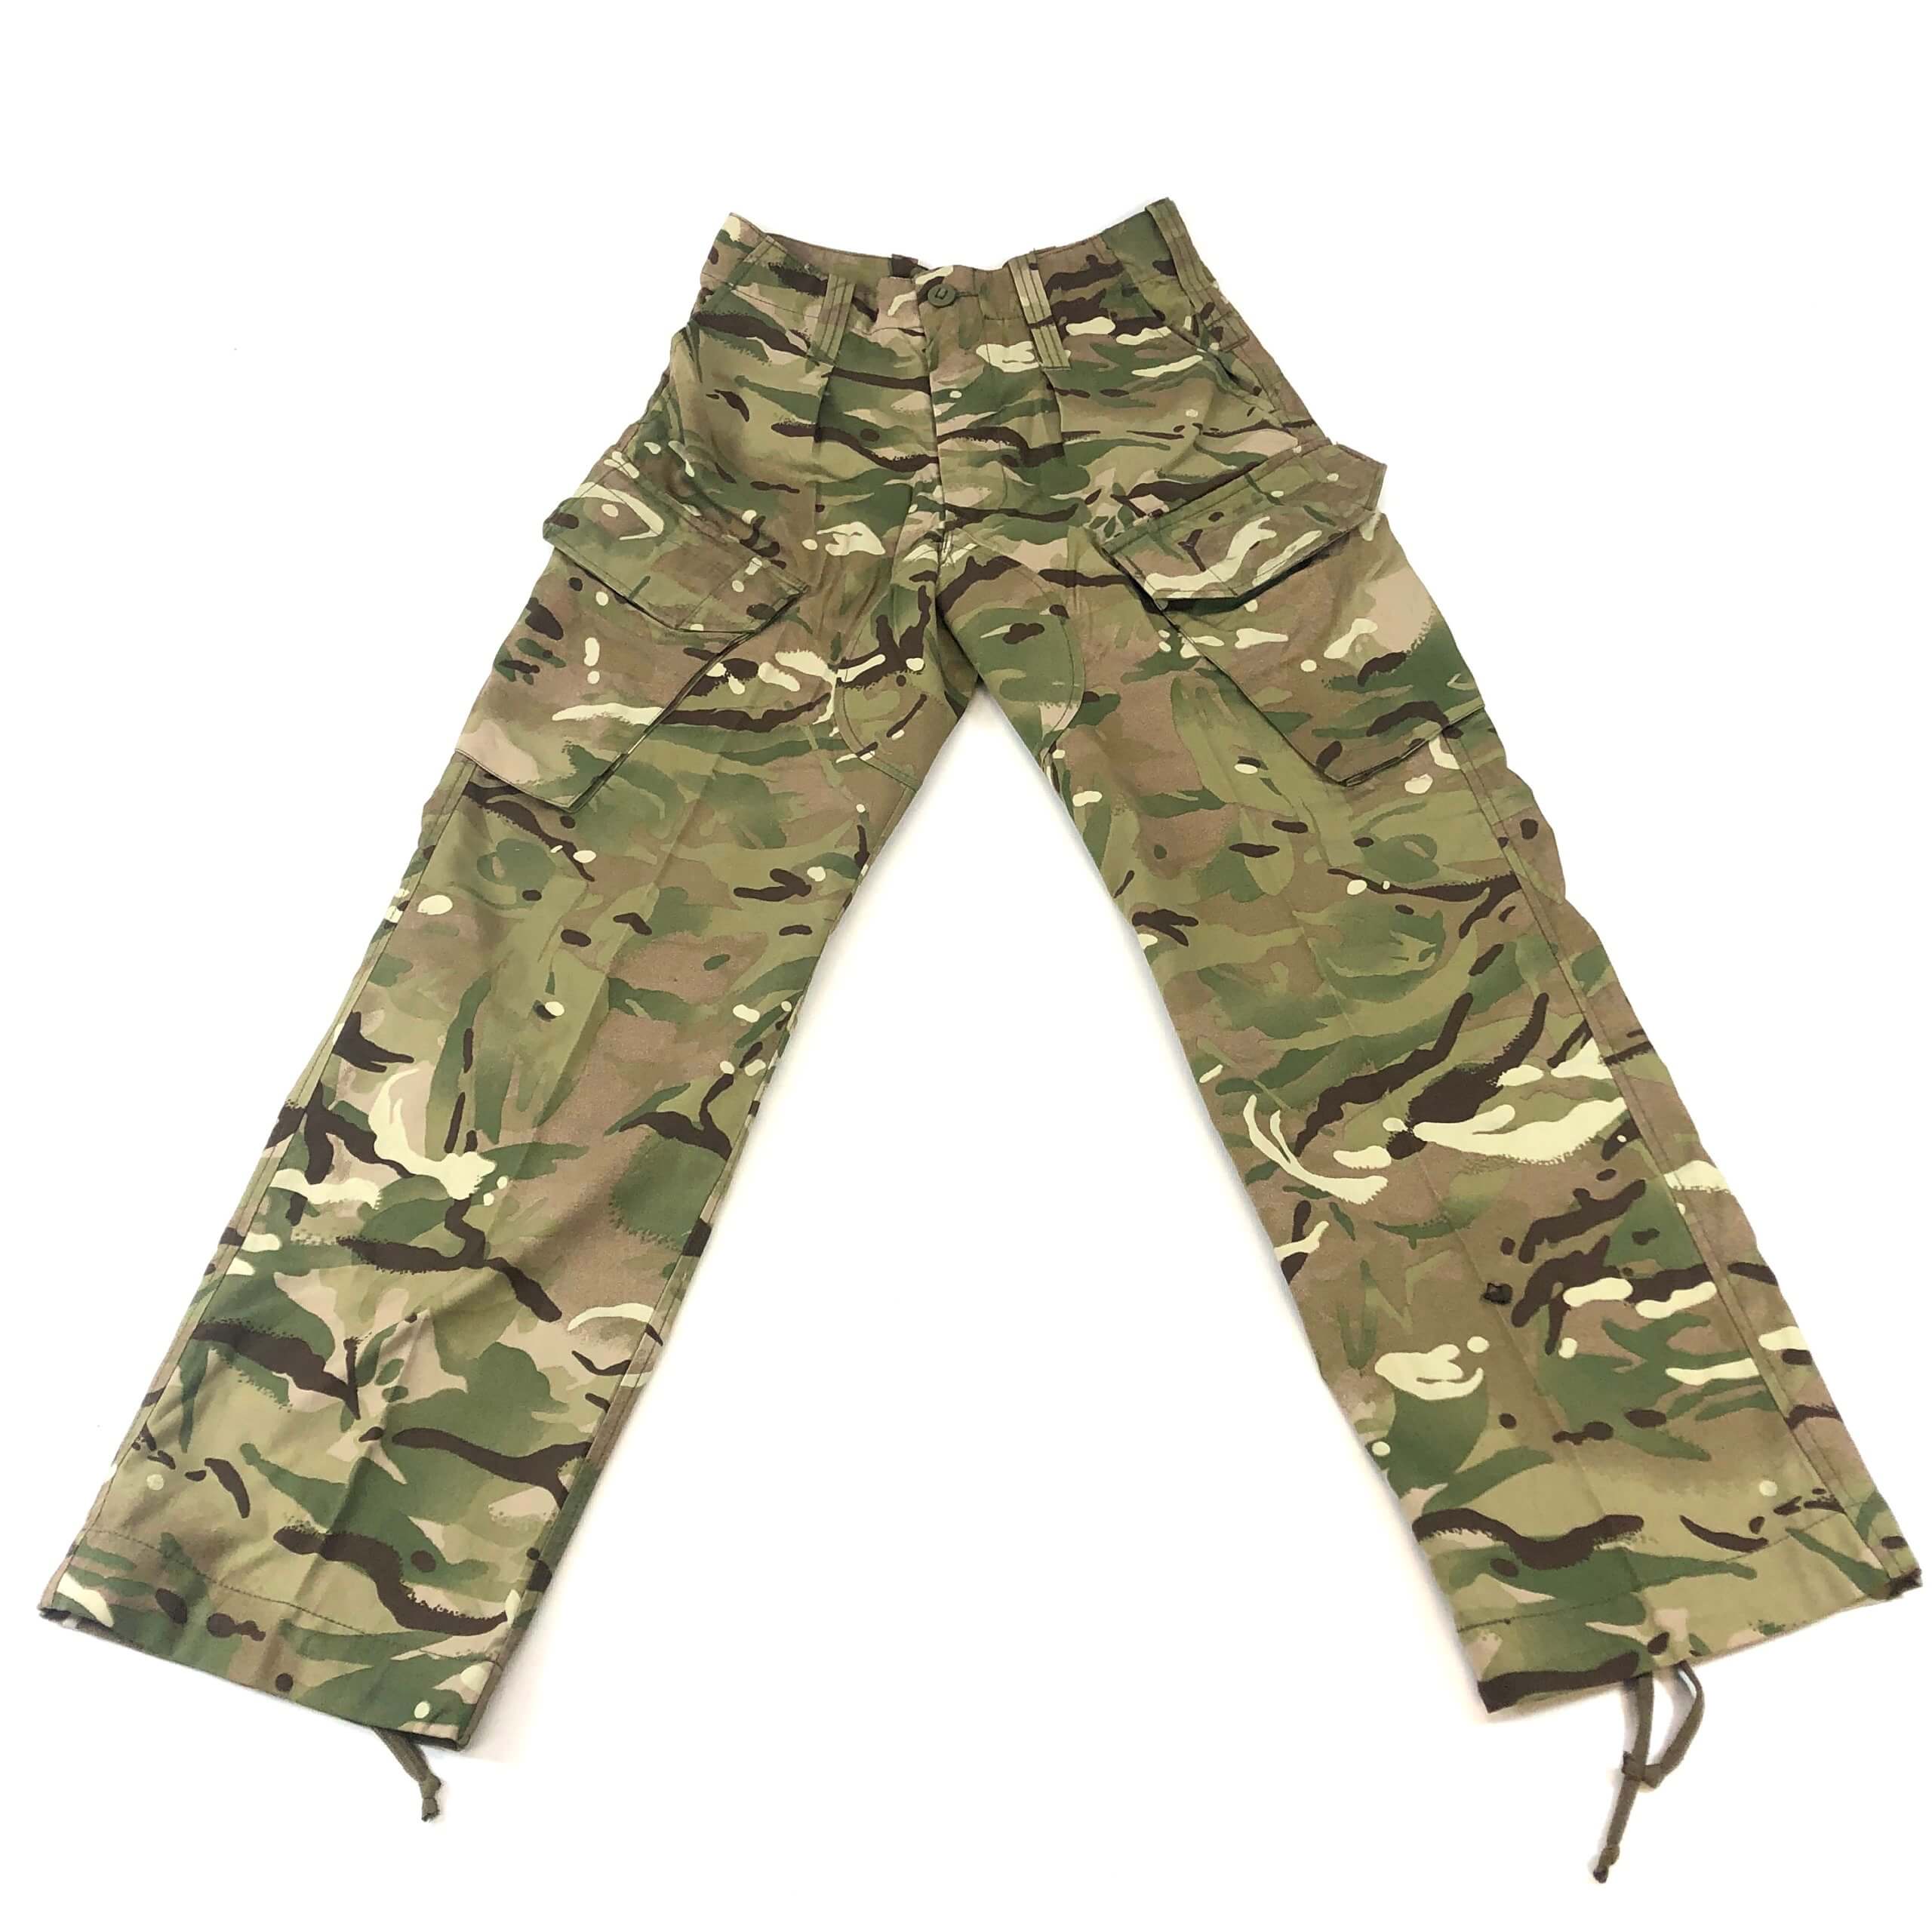 ARMY CARGO CAMOFLAGE COMBAT MILITARY TROUSERS/PANTS 30"-56" WAIST 32" & 30" LEG